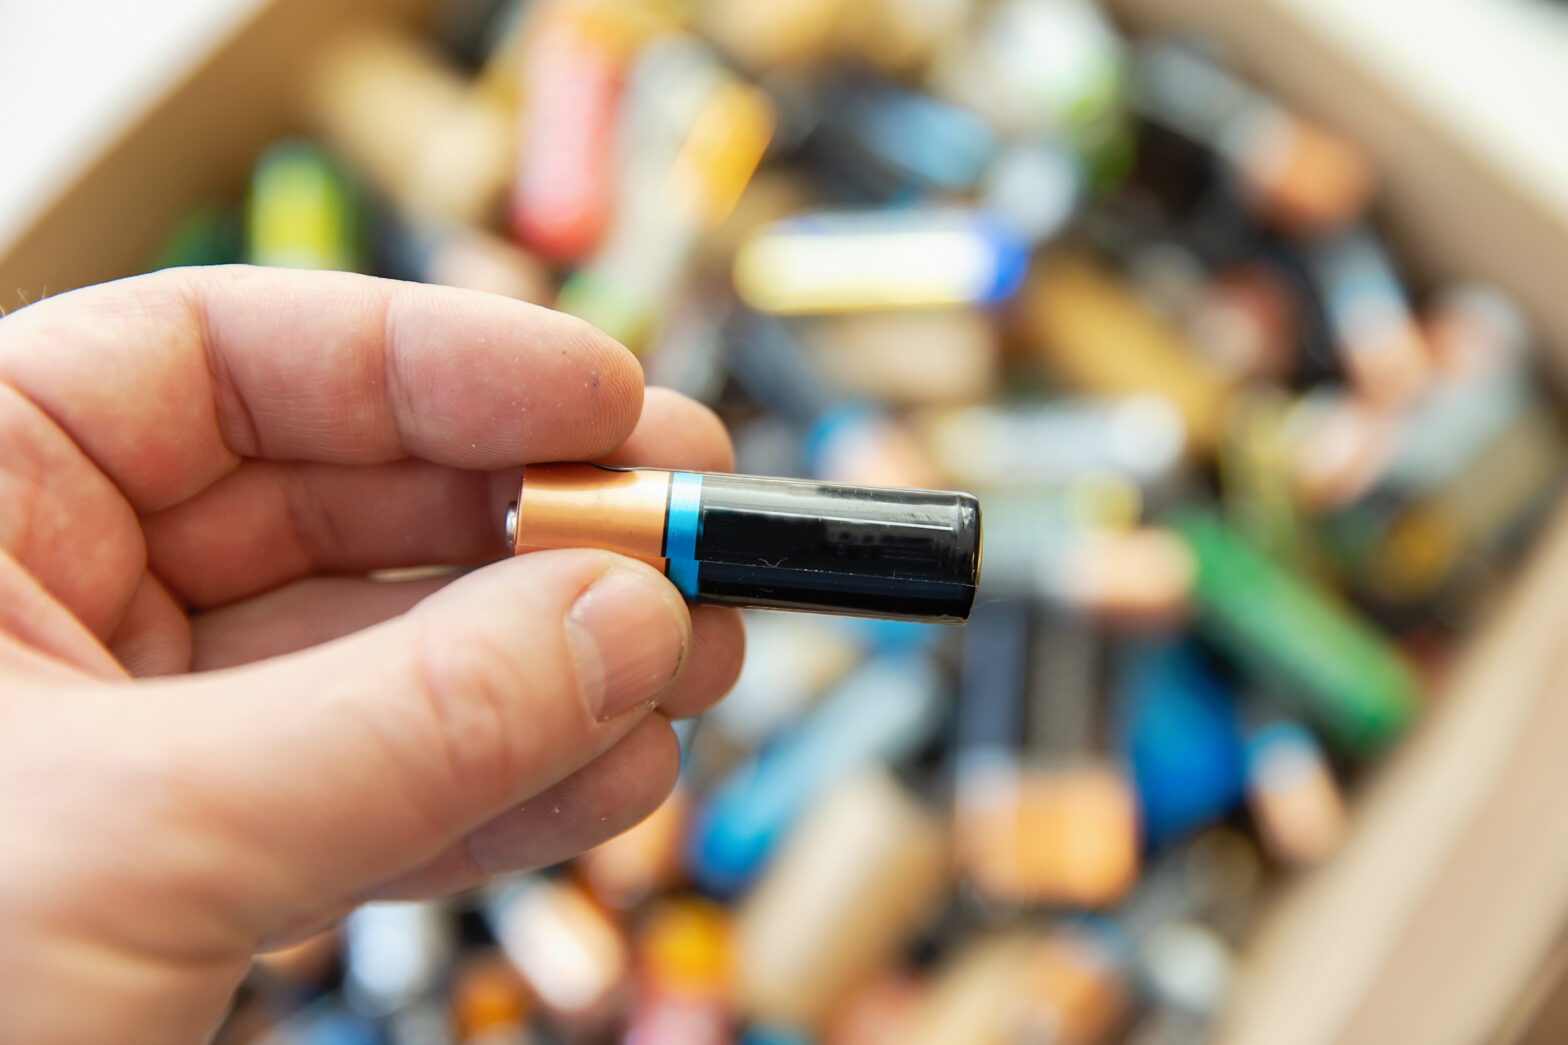 Position statement: Recovering the critical raw materials in batteries